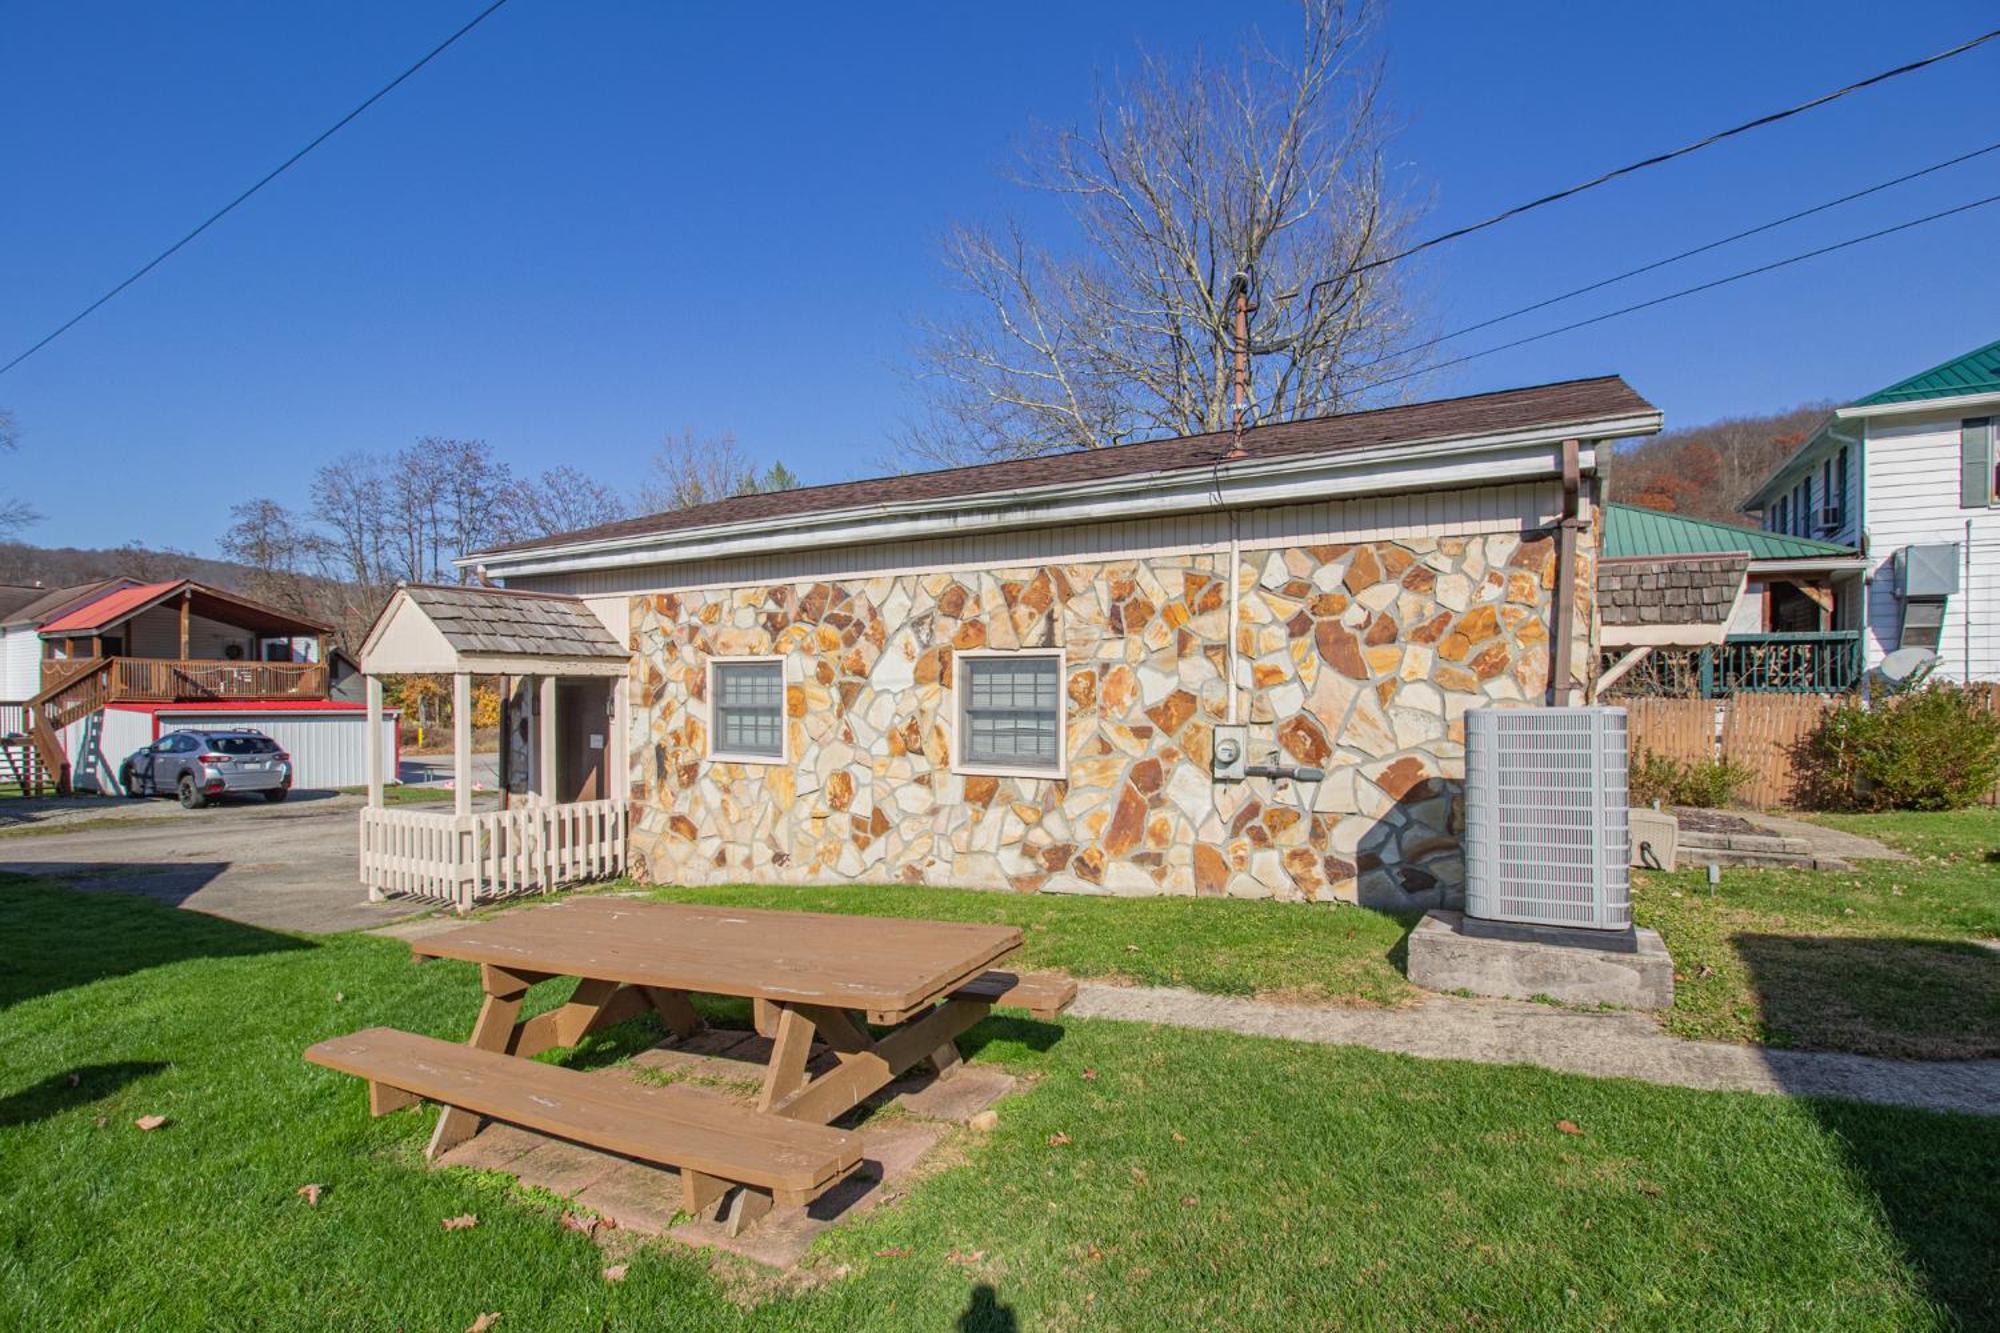 Stay In Ohiopyle - Closest Place To The Gap Trail In Ohiopyle, Pa Farmington Exterior foto